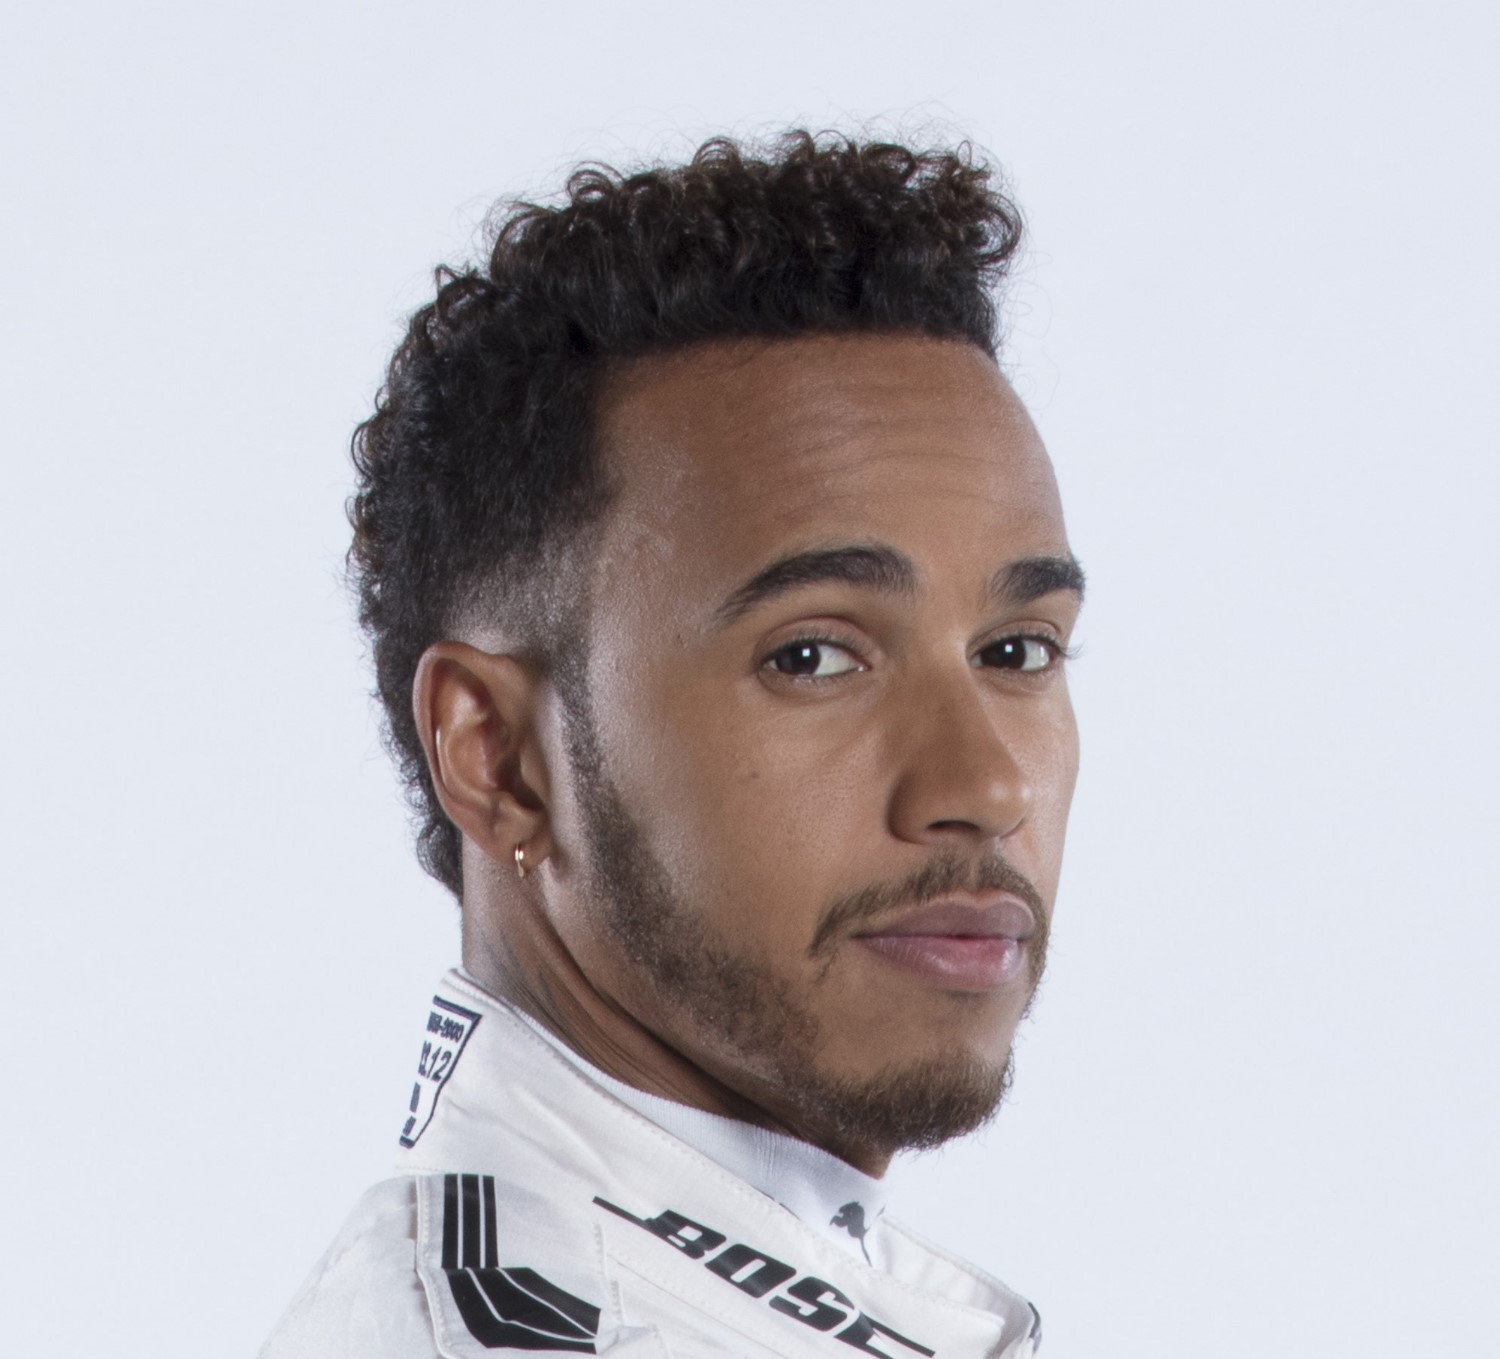 Hamilton will never leave Mercedes as long as Aldo Costa is designing the cars. Costa made Schumacher and he is making Hamilton